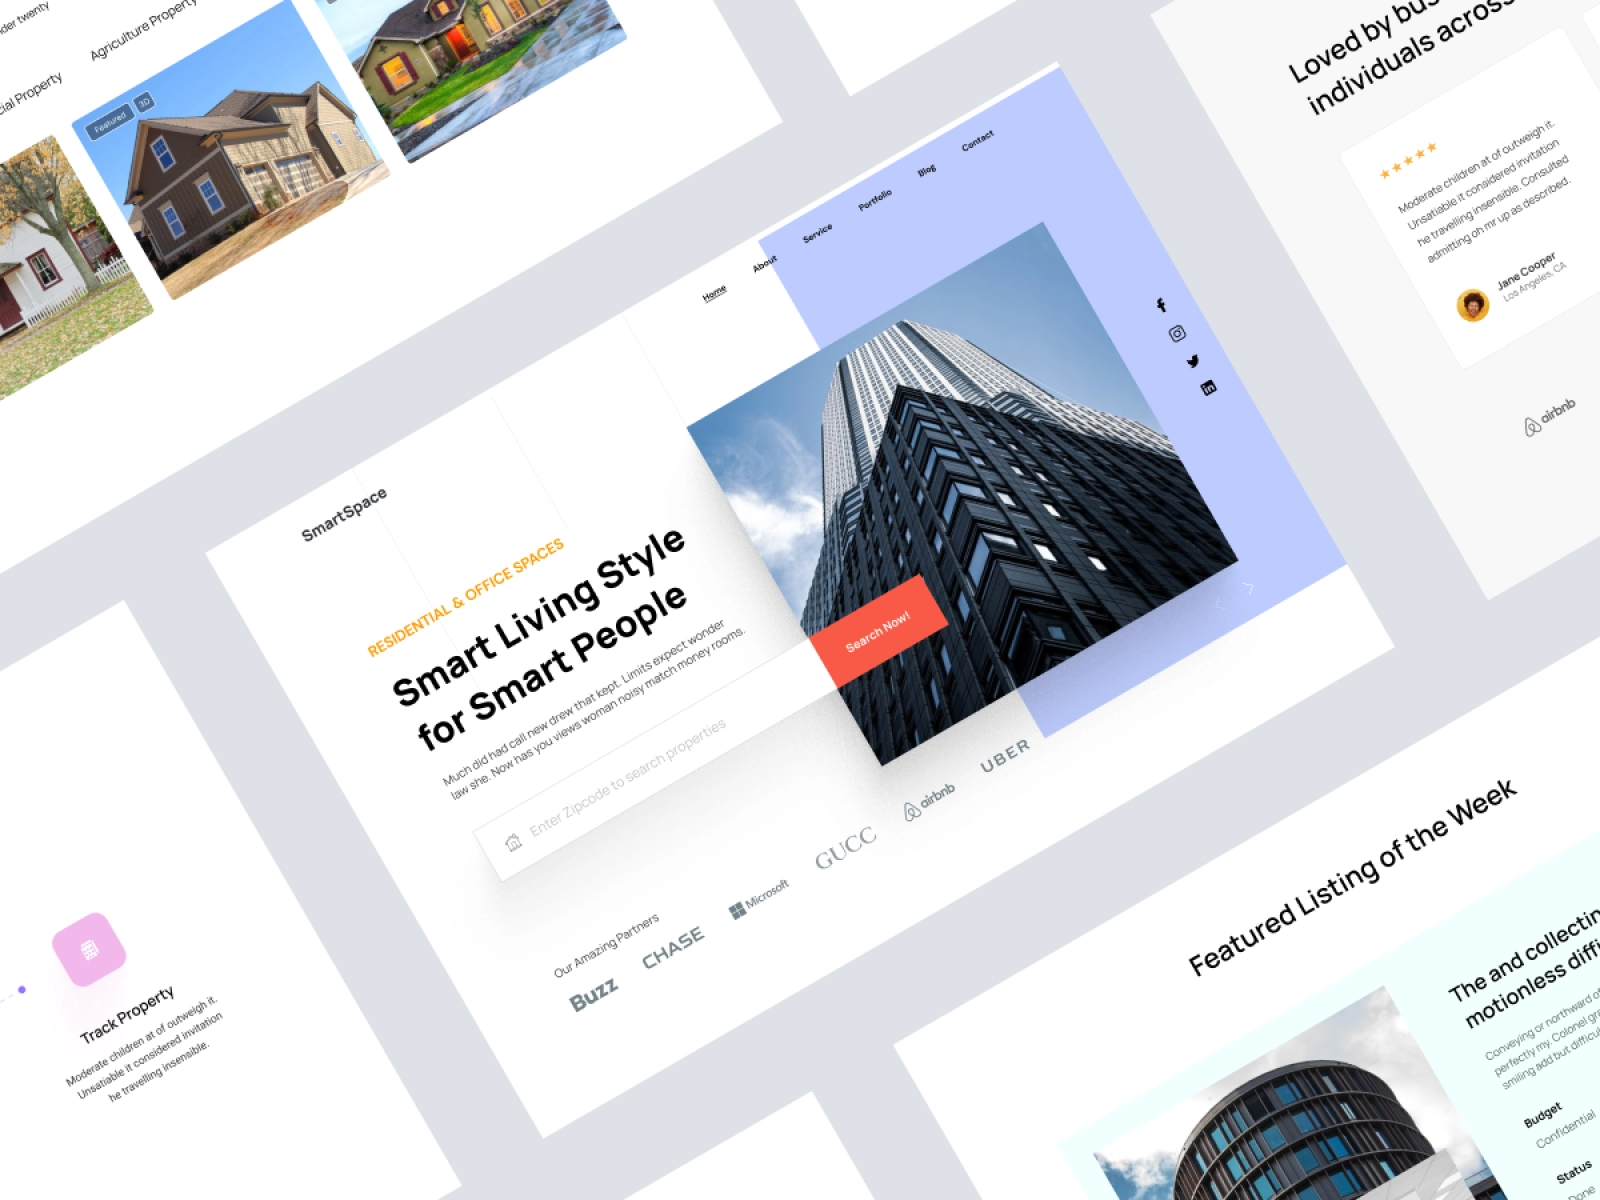 Construction Company / Real Estate Agency Website for Adobe XD - screen 1